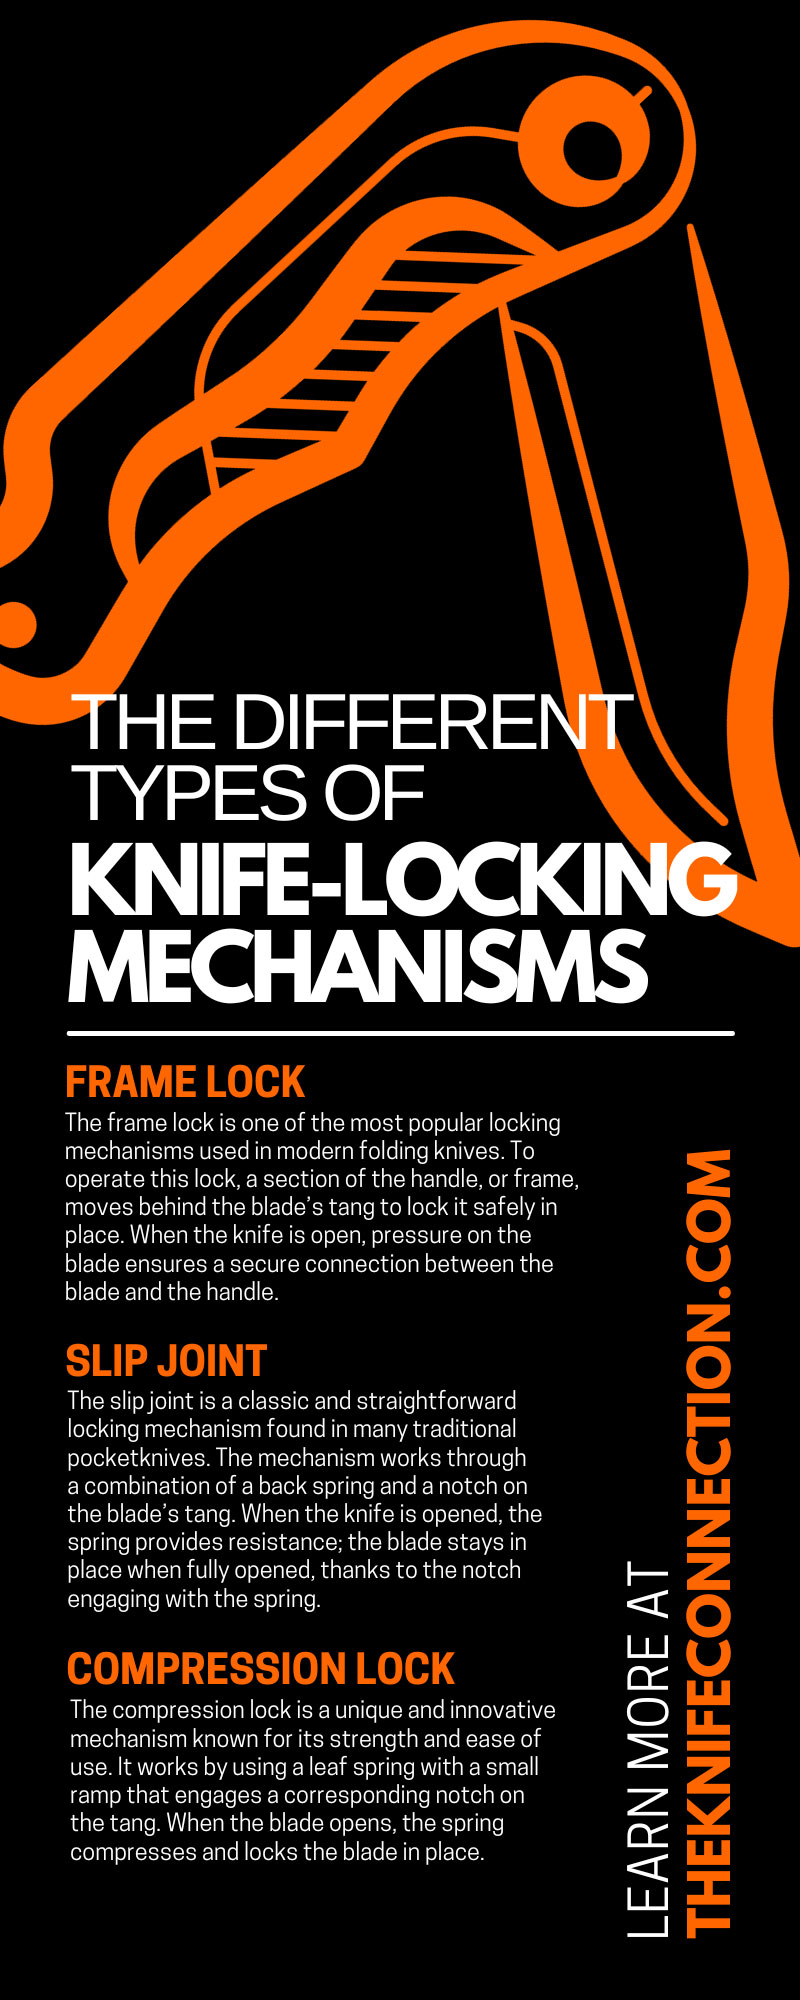 The Different Types of Knife-Locking Mechanisms